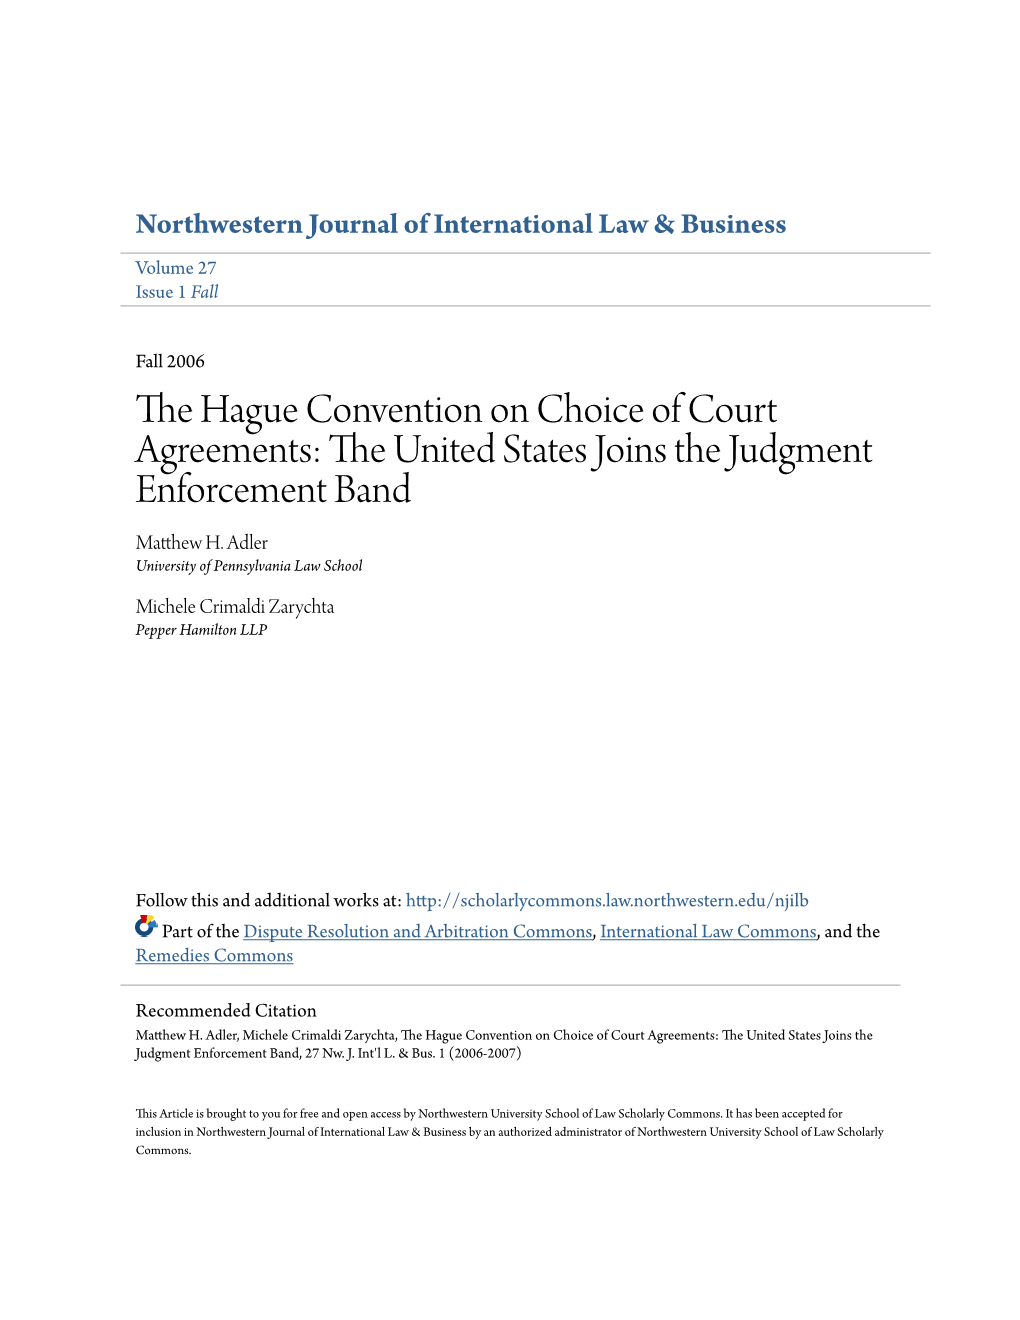 The Hague Convention on Choice of Court Agreements: the United States Joins the Judgment Enforcement Band